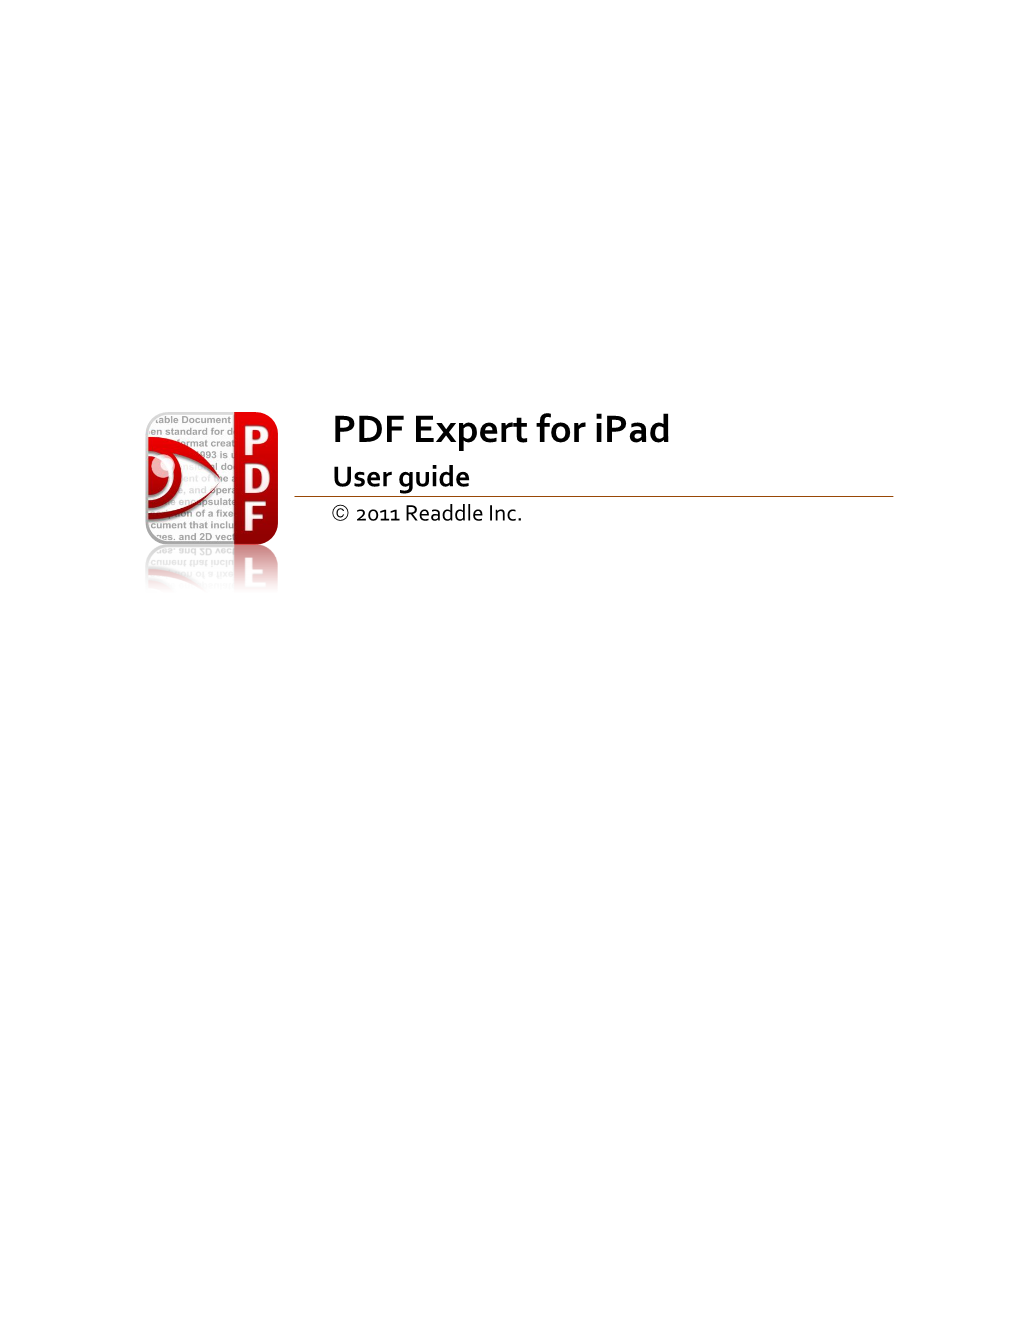 PDF Expert for Ipad User Guide  2011 Readdle Inc